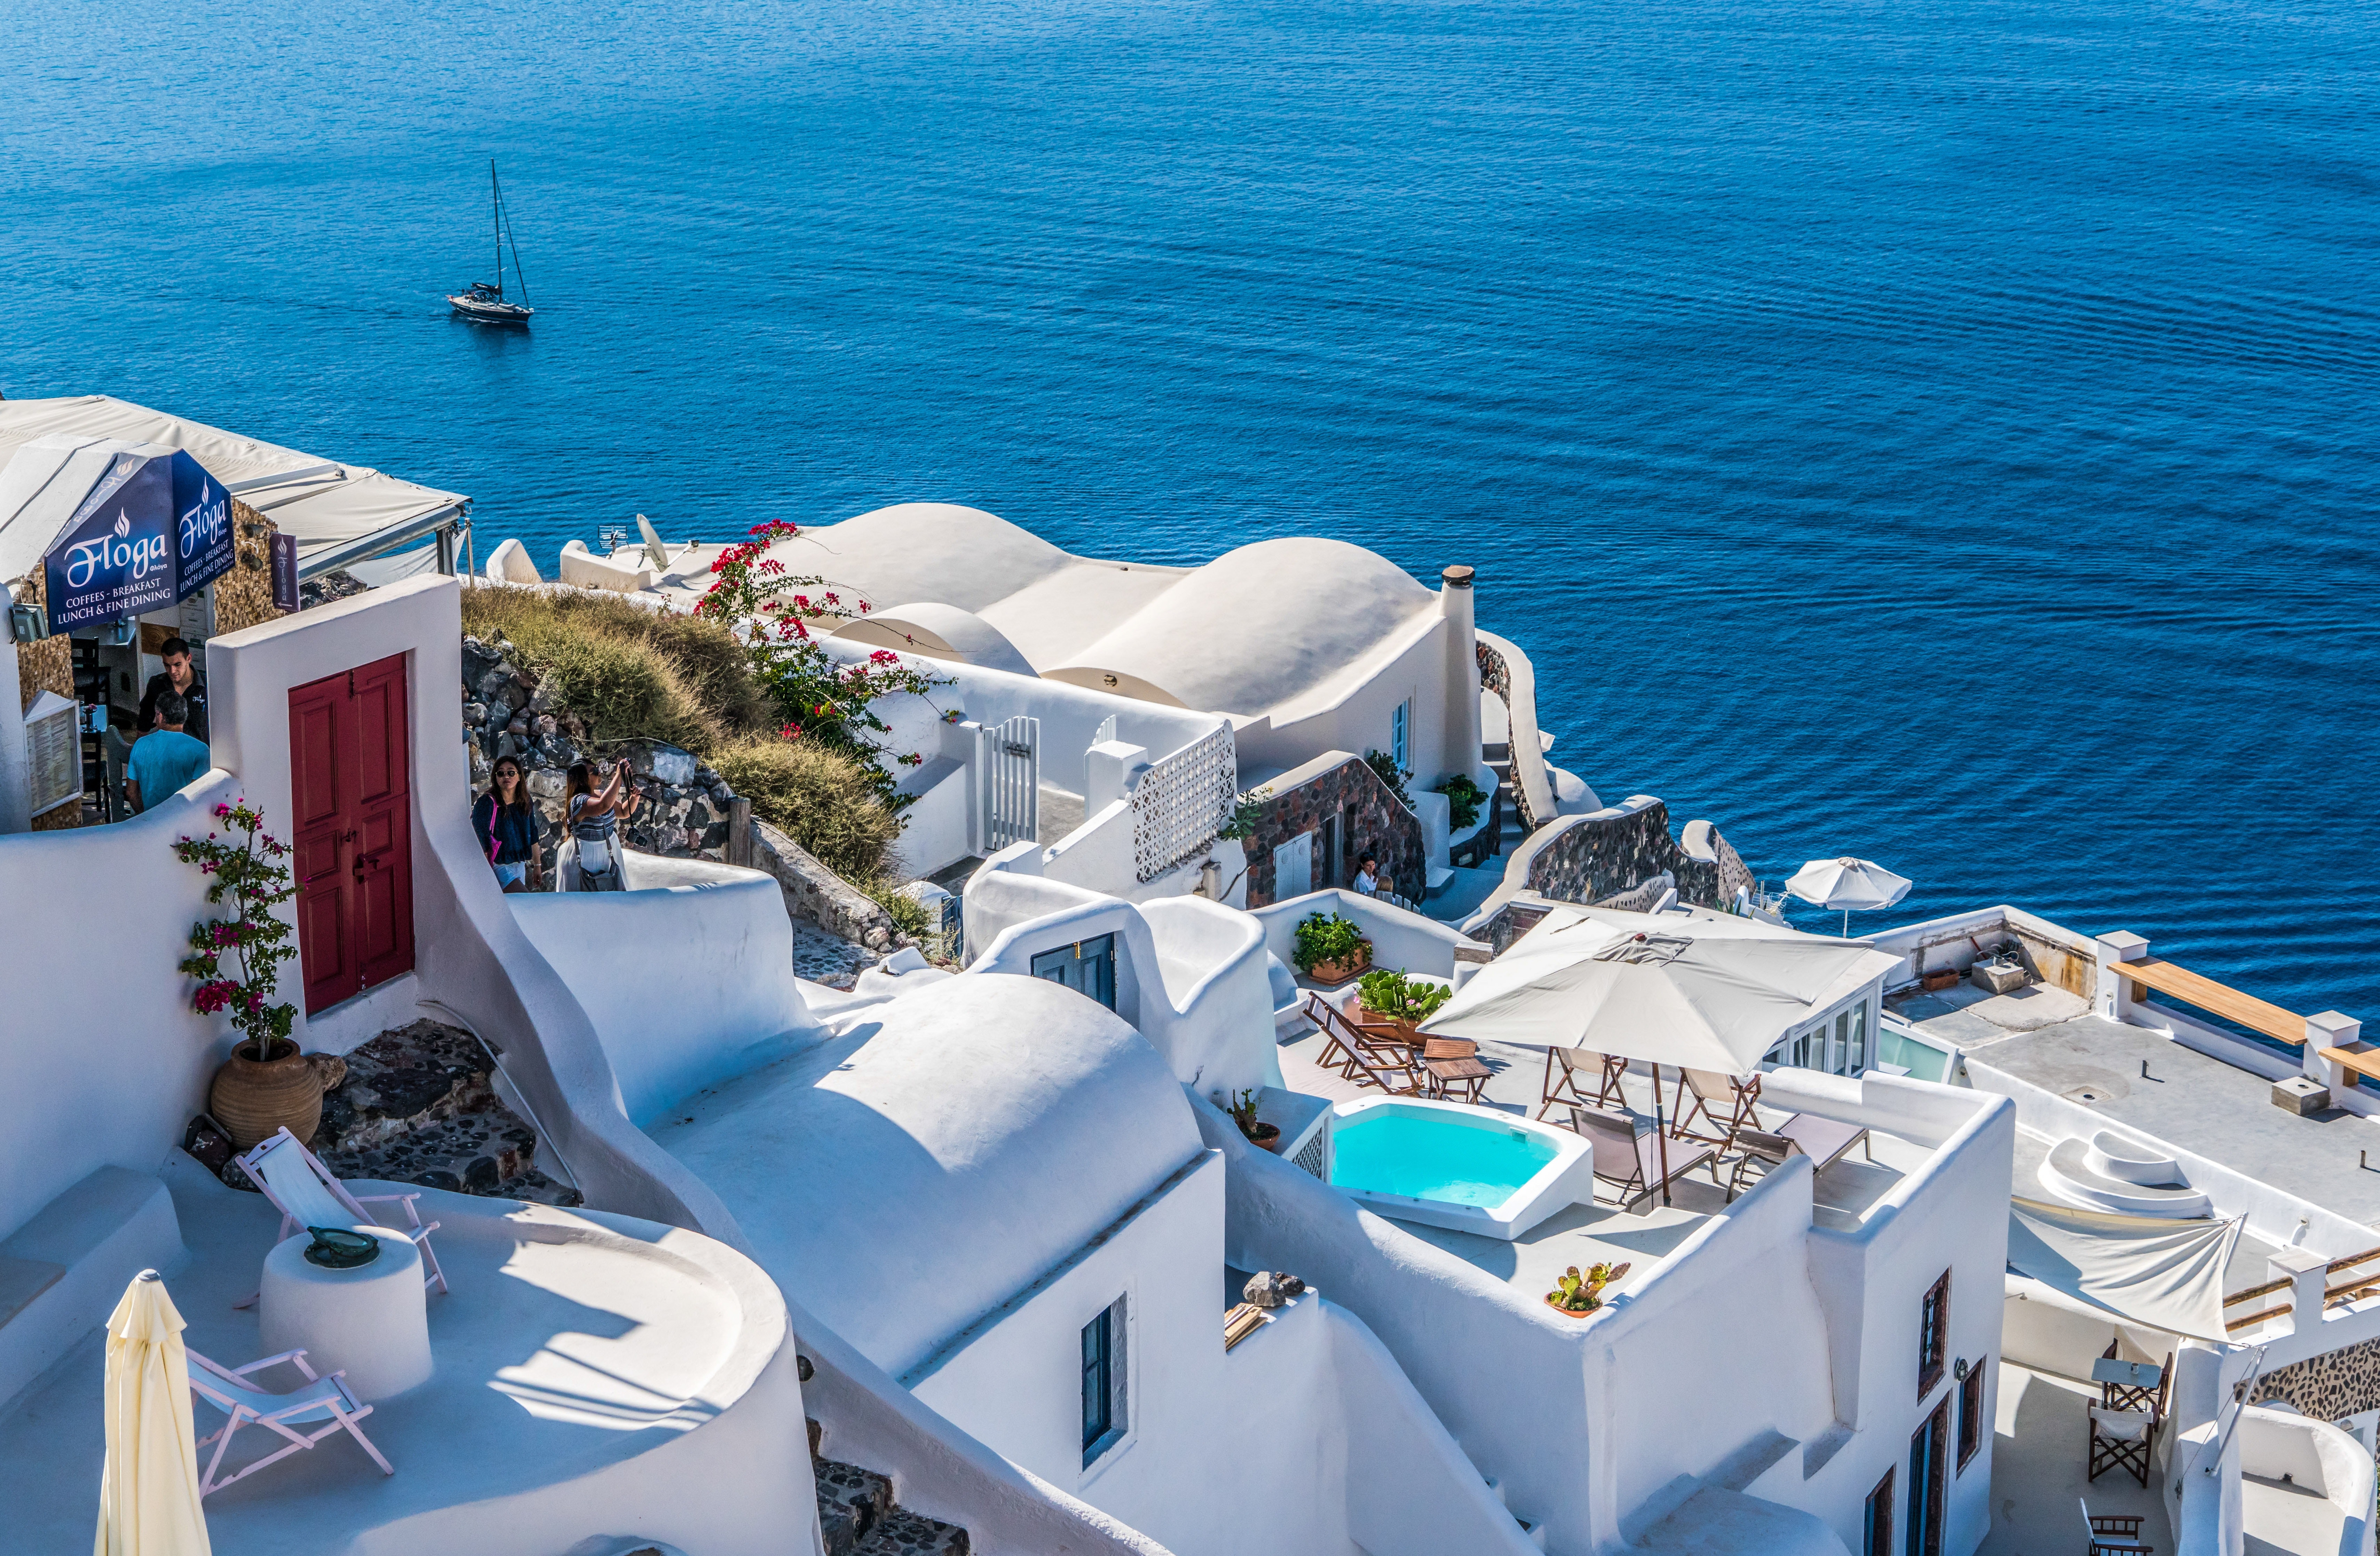 Tour the Greek Islands for an unforgettable Summer experience 
Greece from 199€